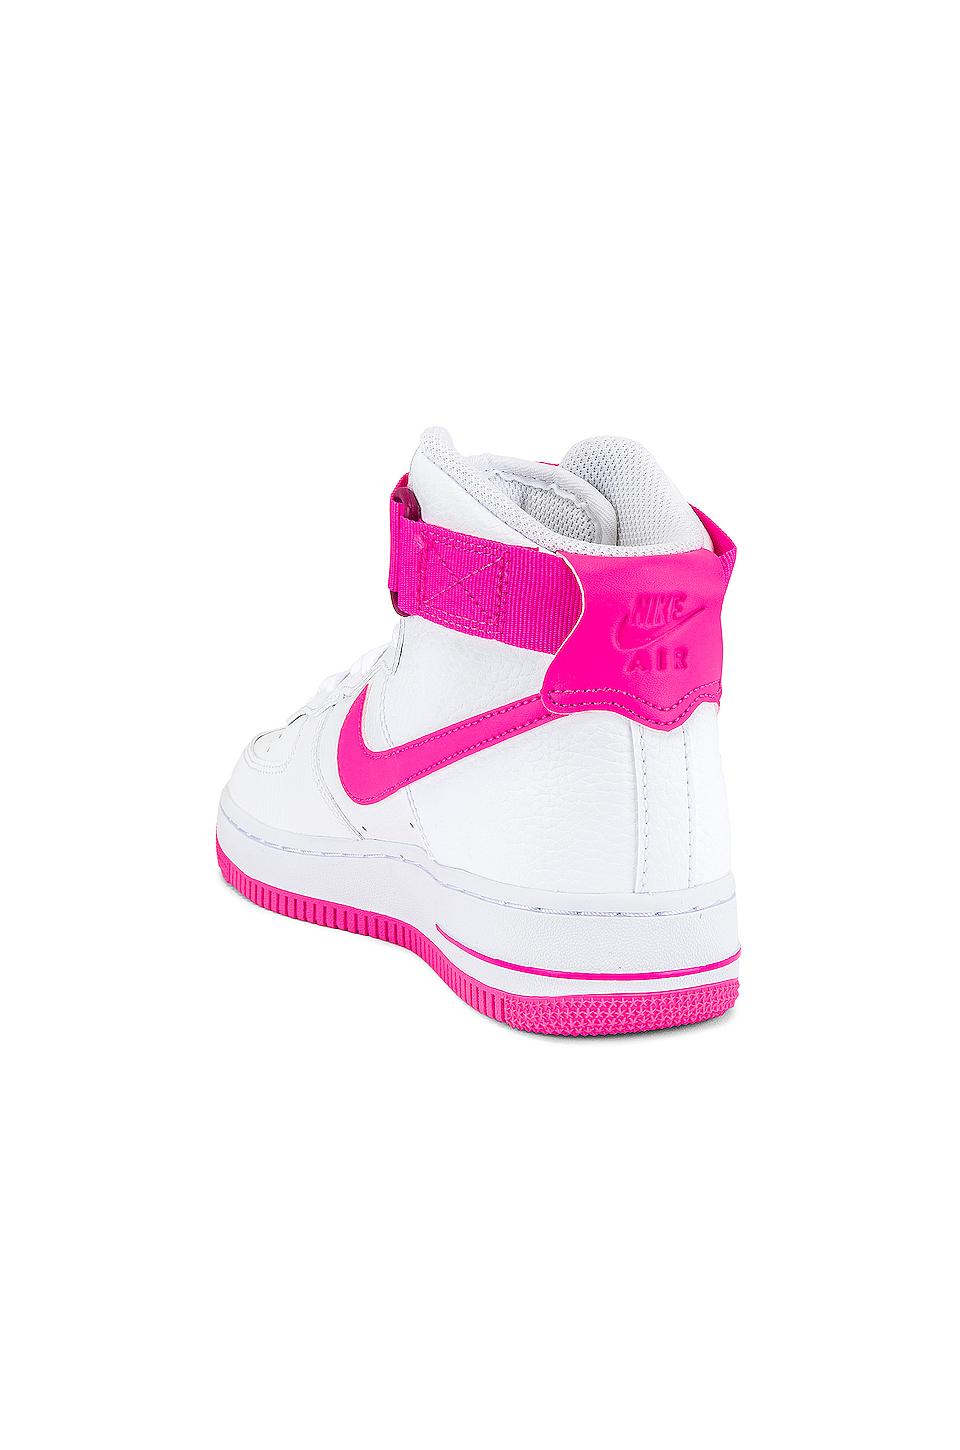 Nike Leather Women's Air Force 1 Hi Sneaker in White & Hot Pink (Pink) |  Lyst